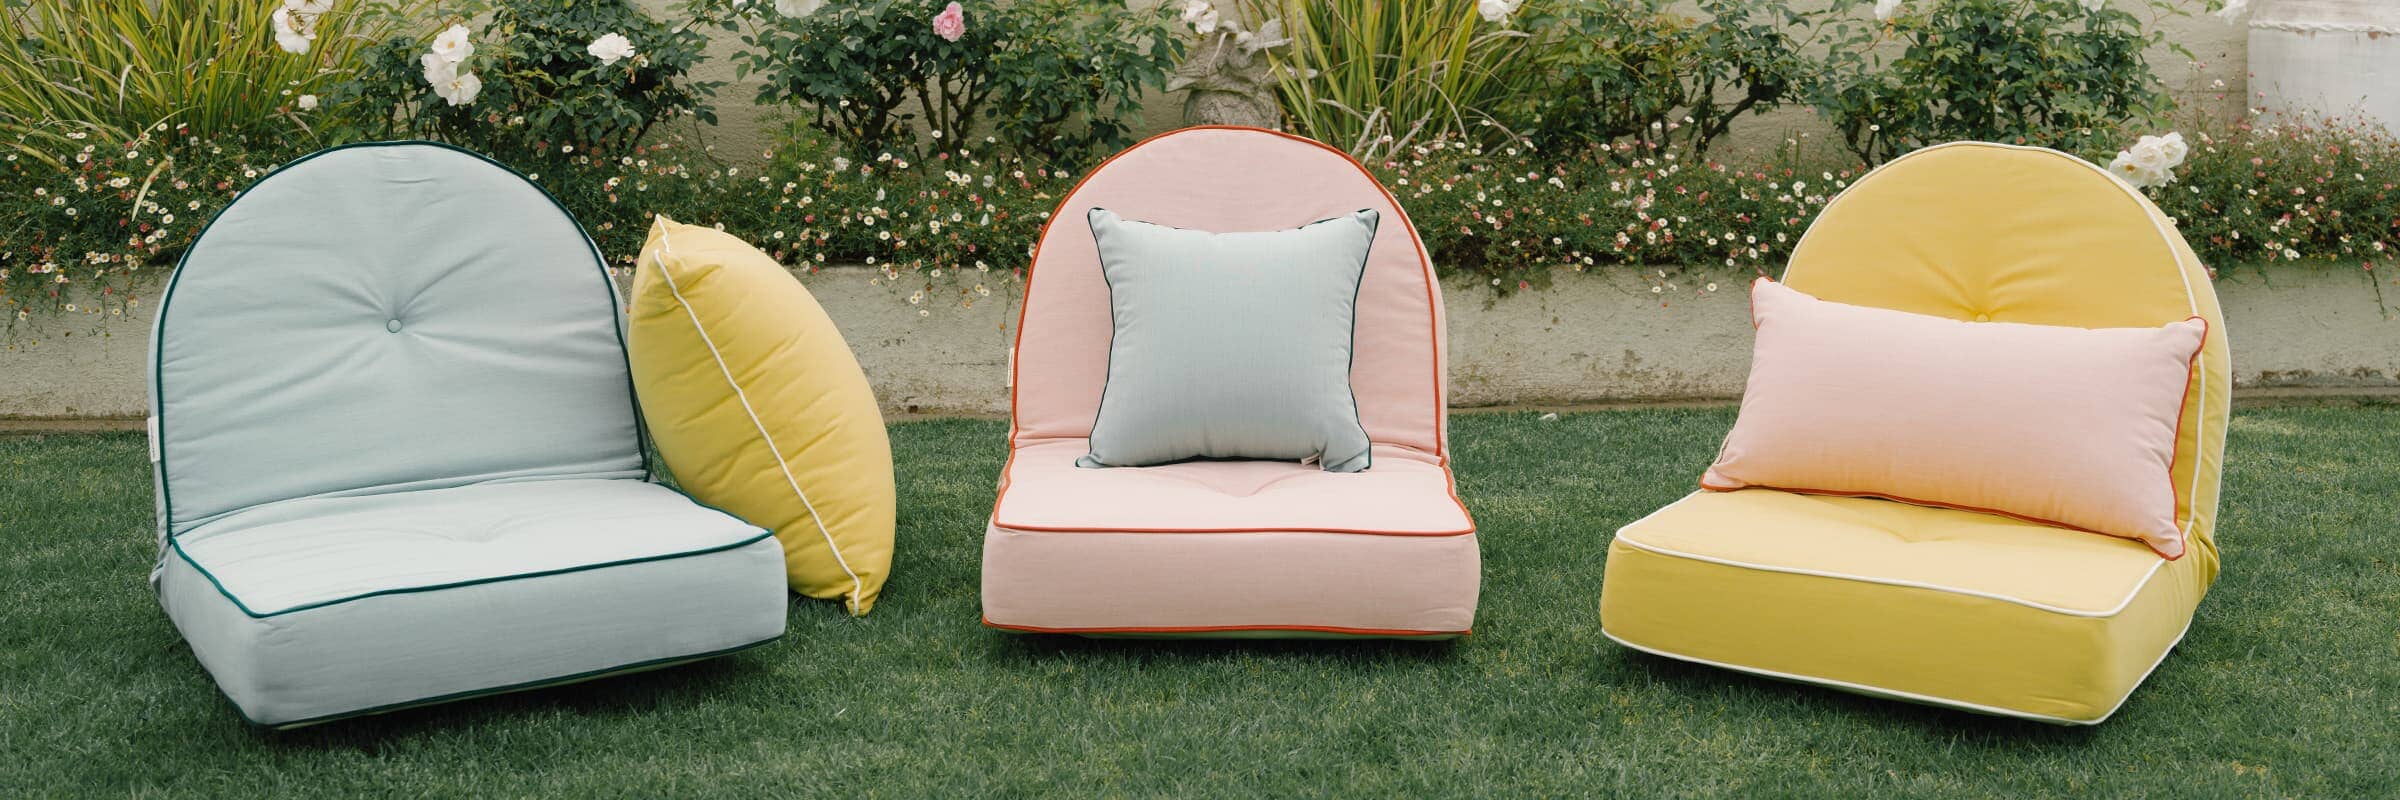 three colorful reclining pillow loungers with outdoor throw pillows on a lawn